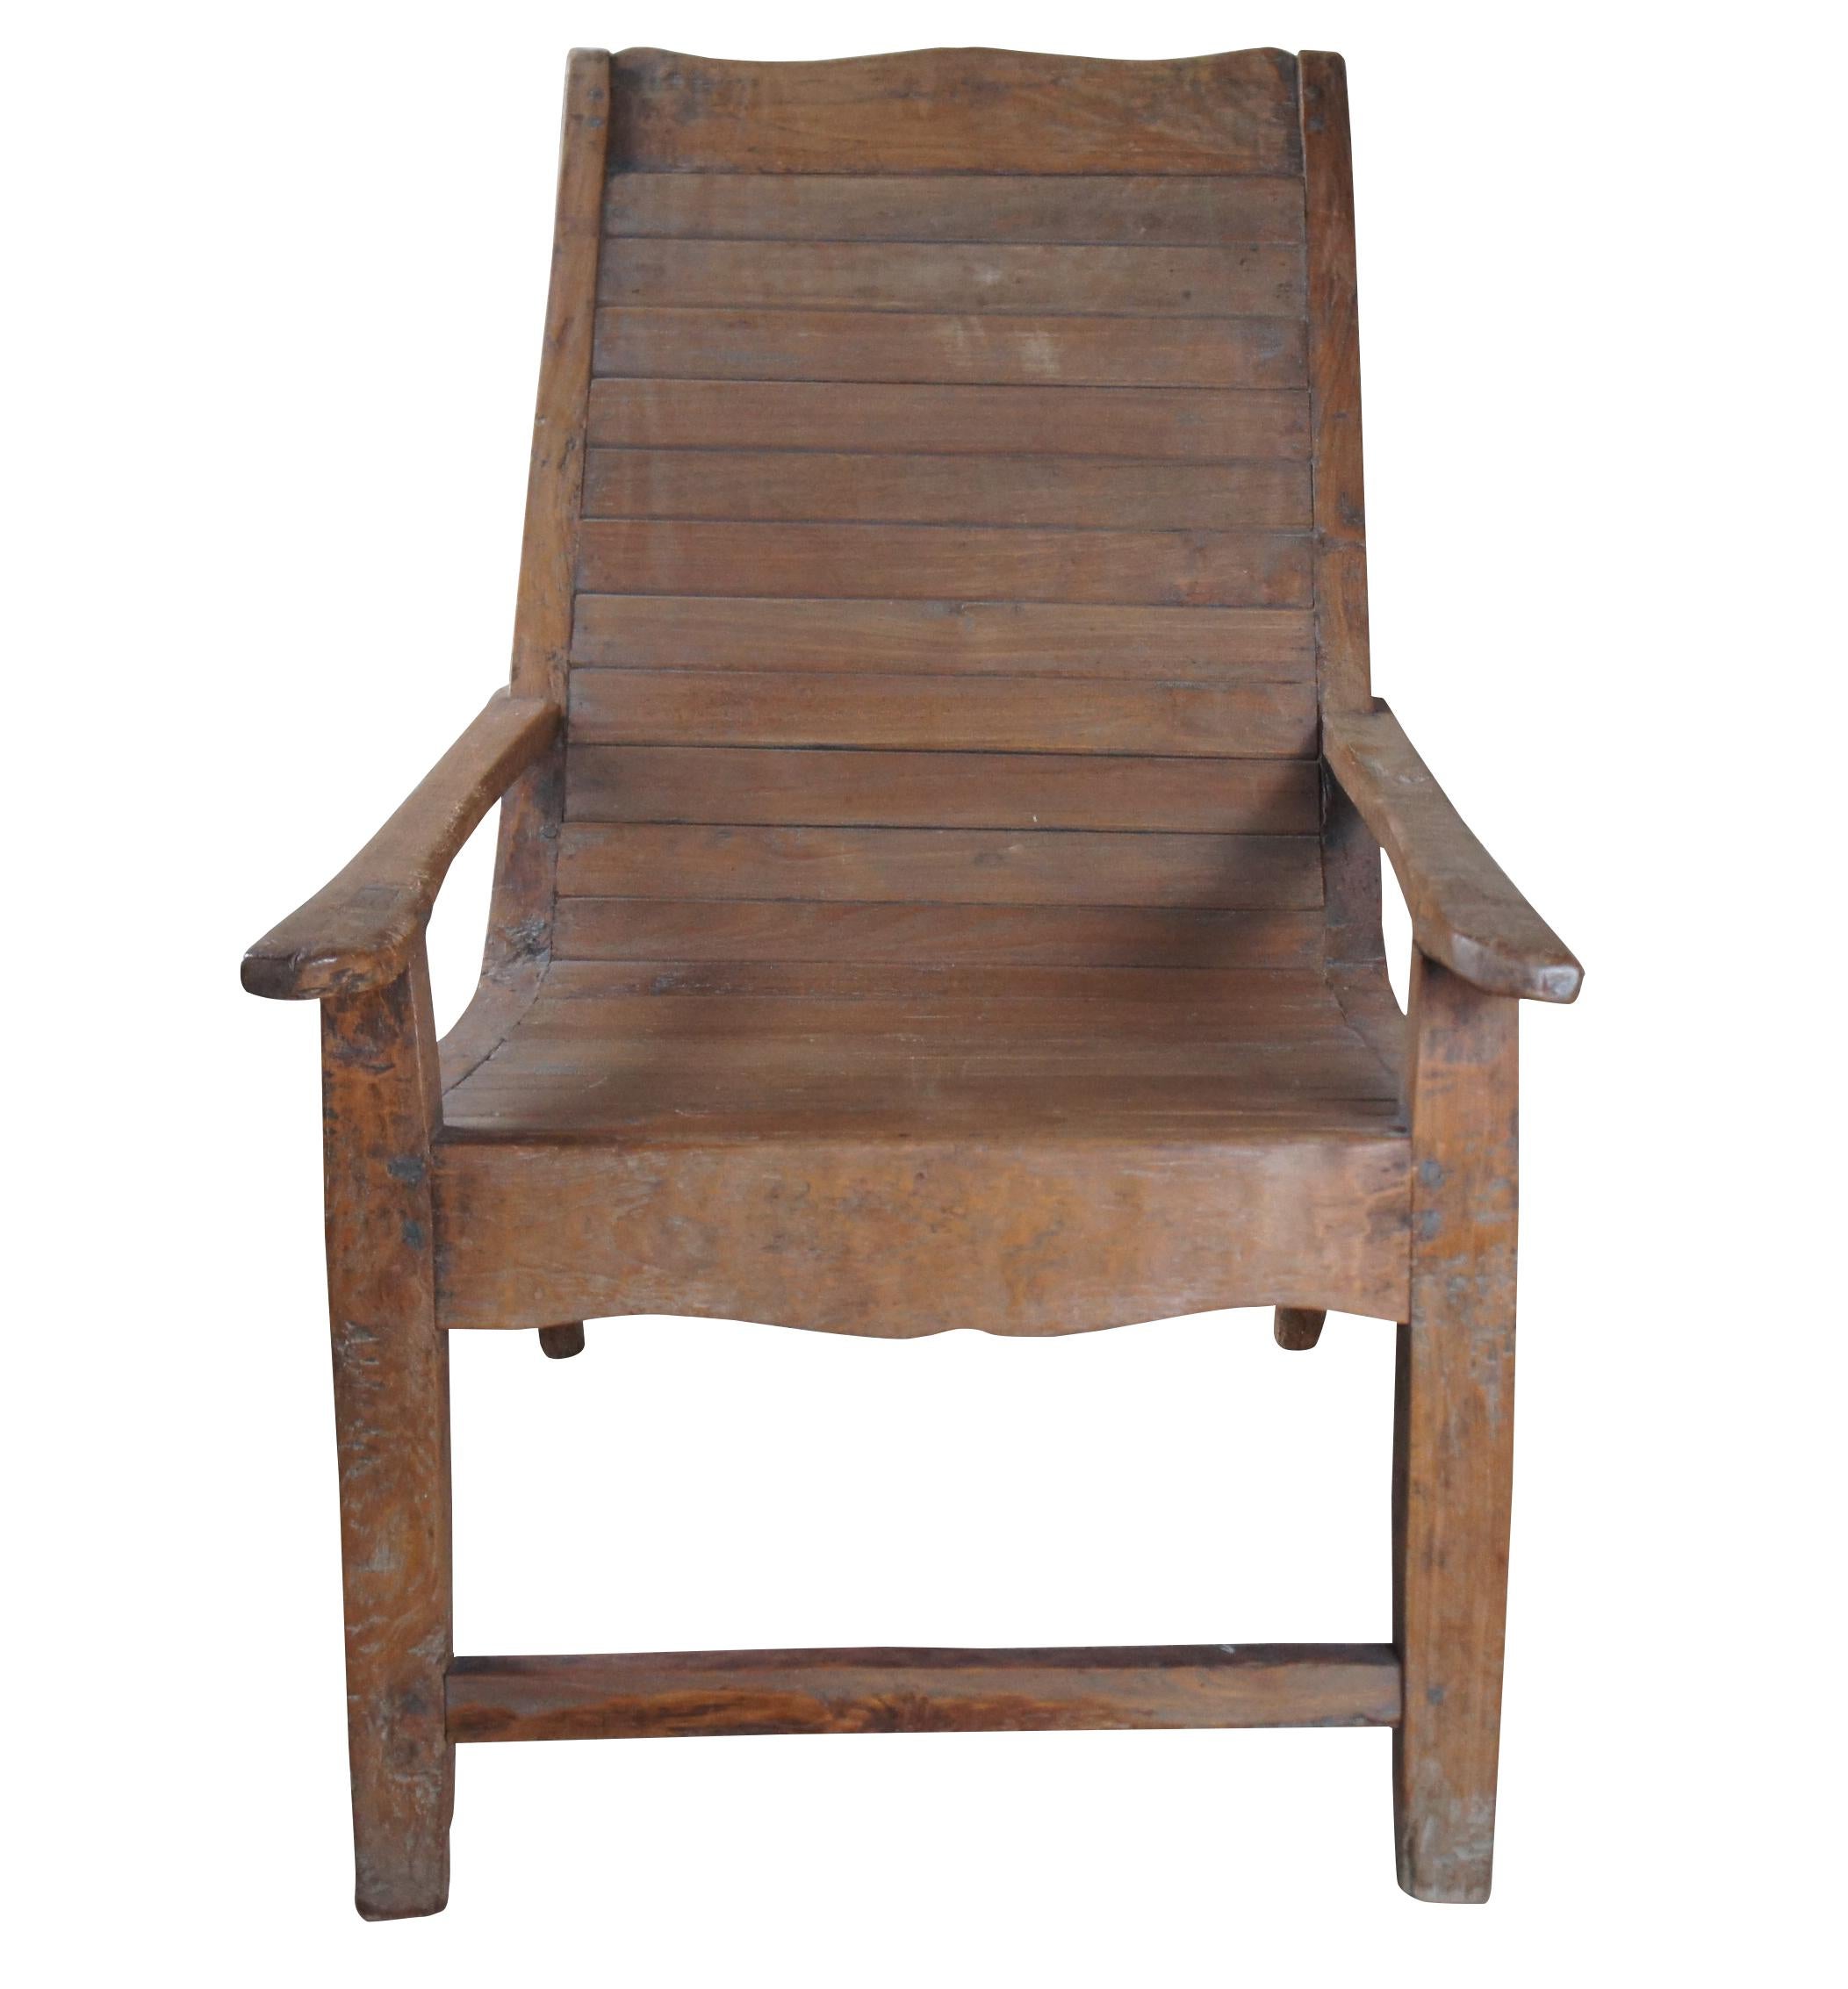 Early 20th century British Colonial Anglo Indian plantation chair. Made from teak in mortise and tenon joinery with a relaxed lounged frame and long arms. Features a curved crest rail and planked seat. Naturally distressed from use and